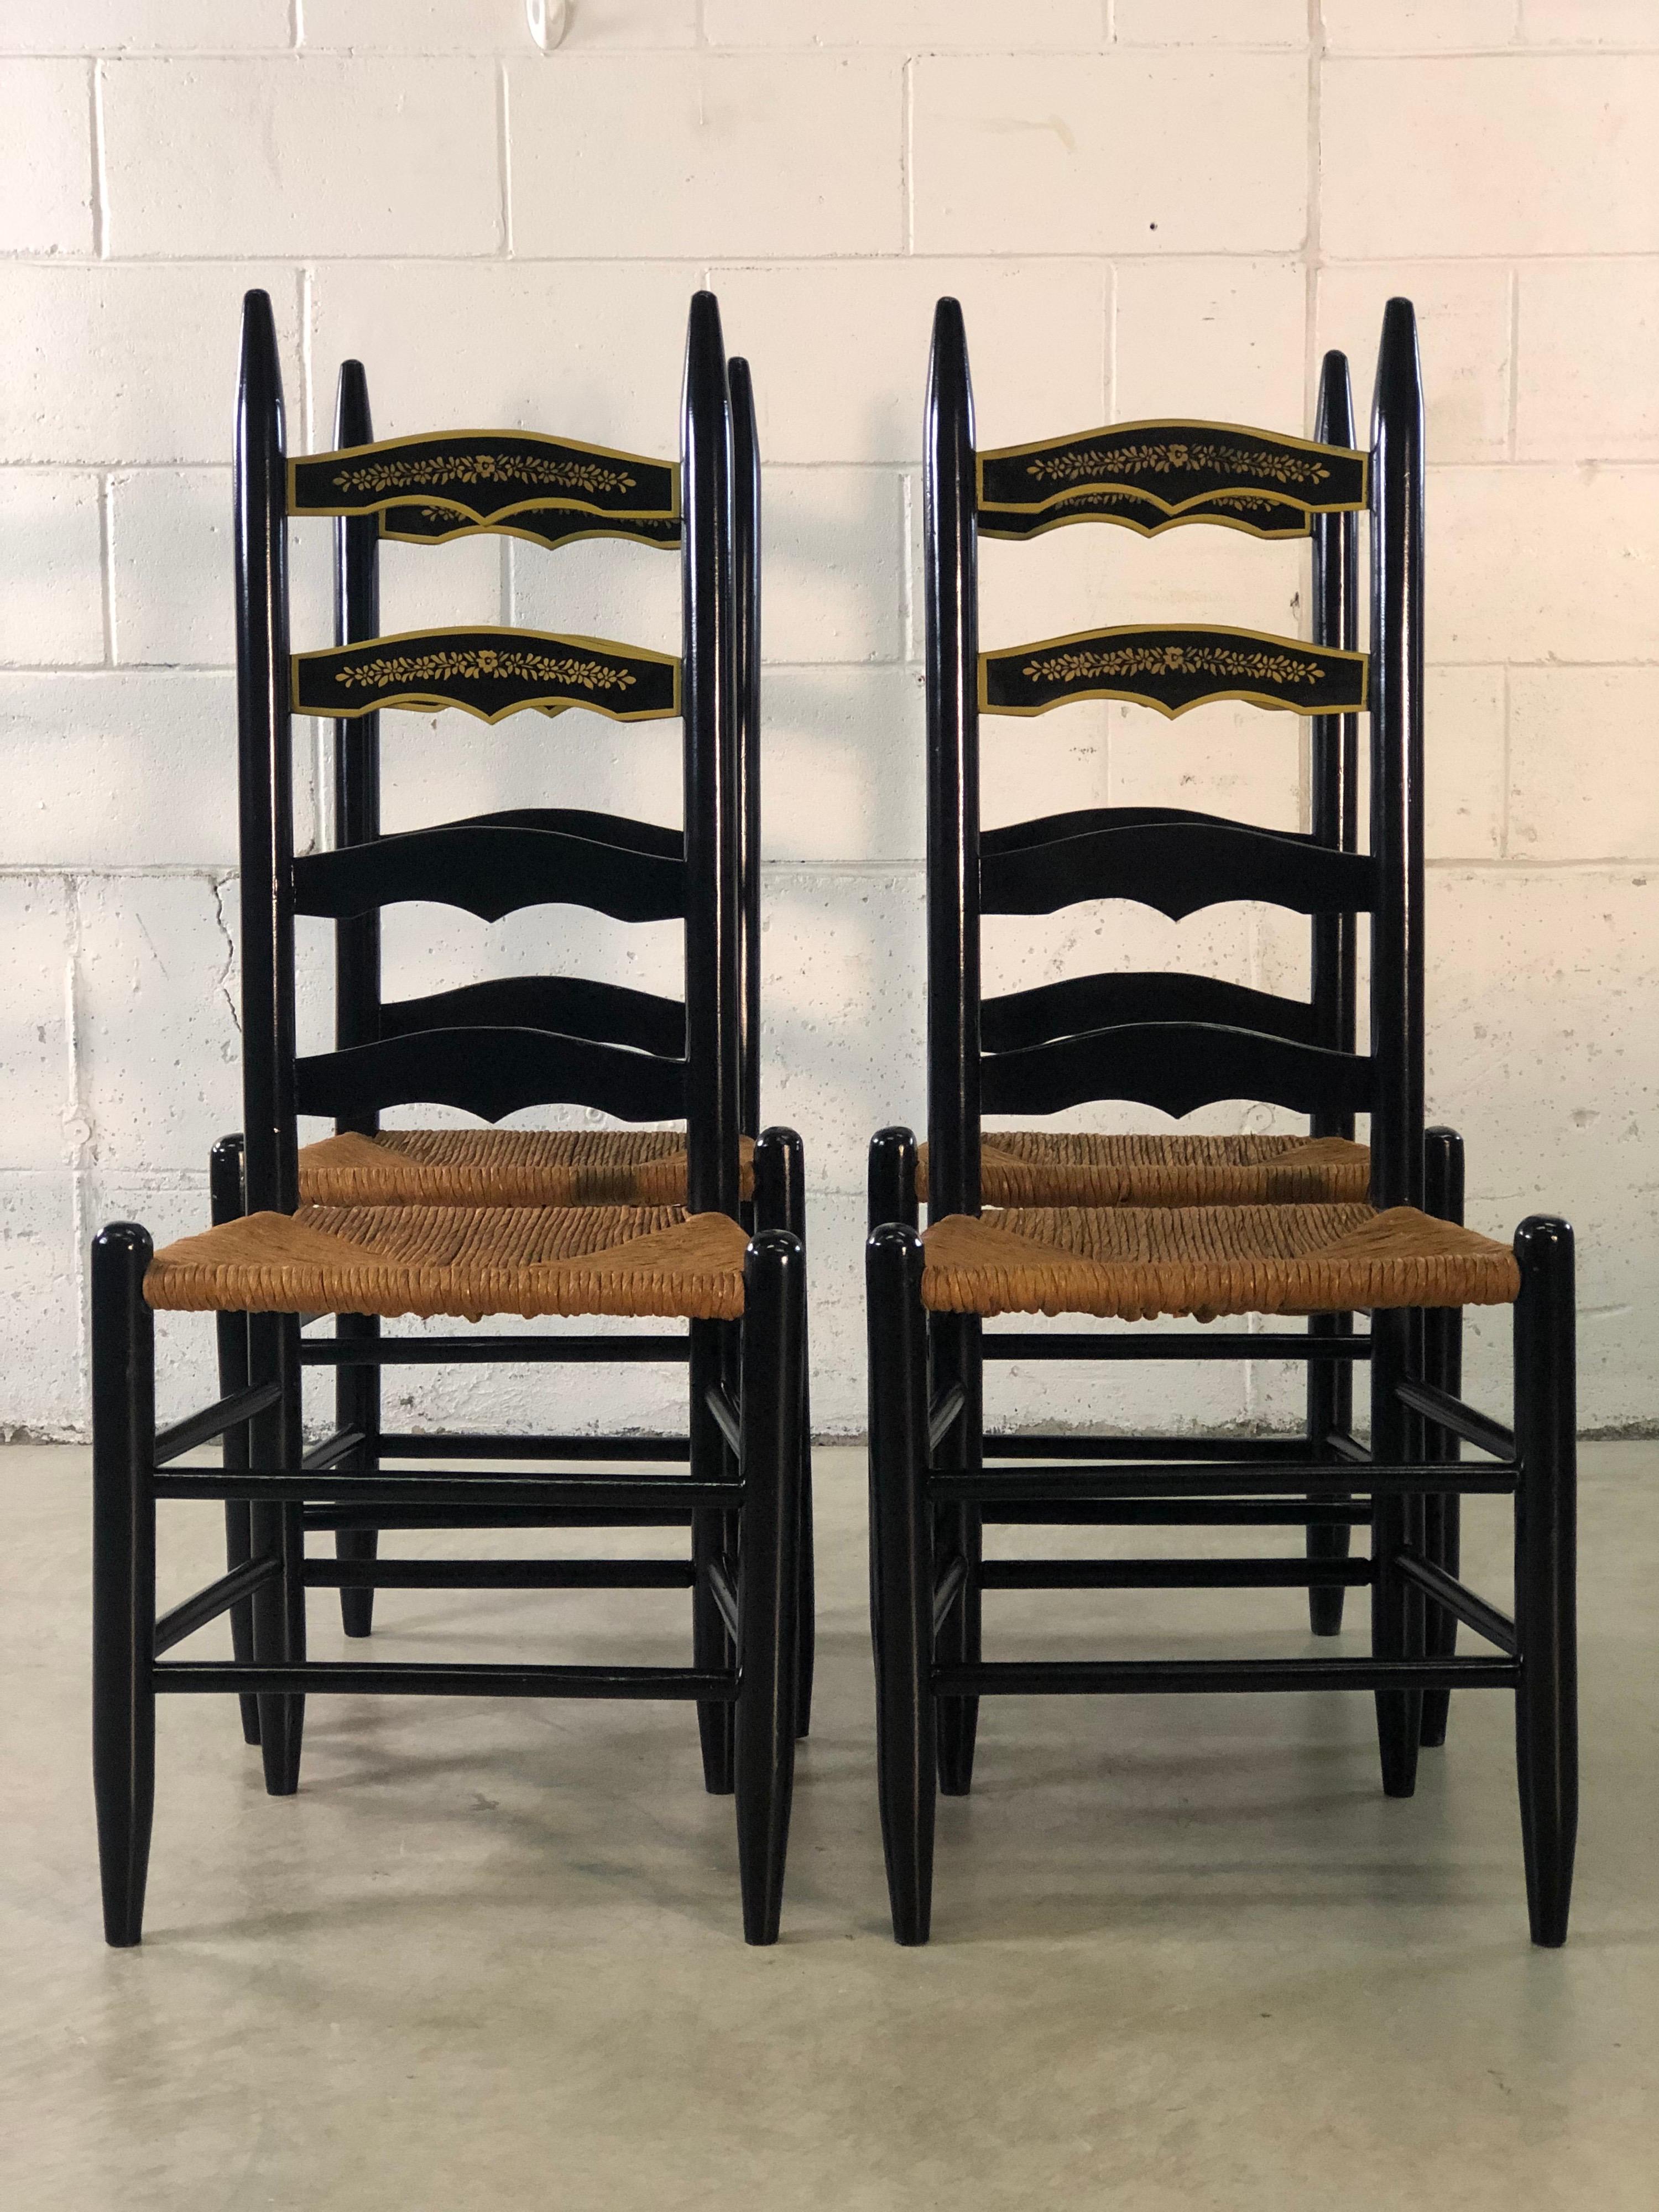 Vintage set of 4 black ladder back dining chairs with rush seats and painted floral accents. Excellent refinished condition.